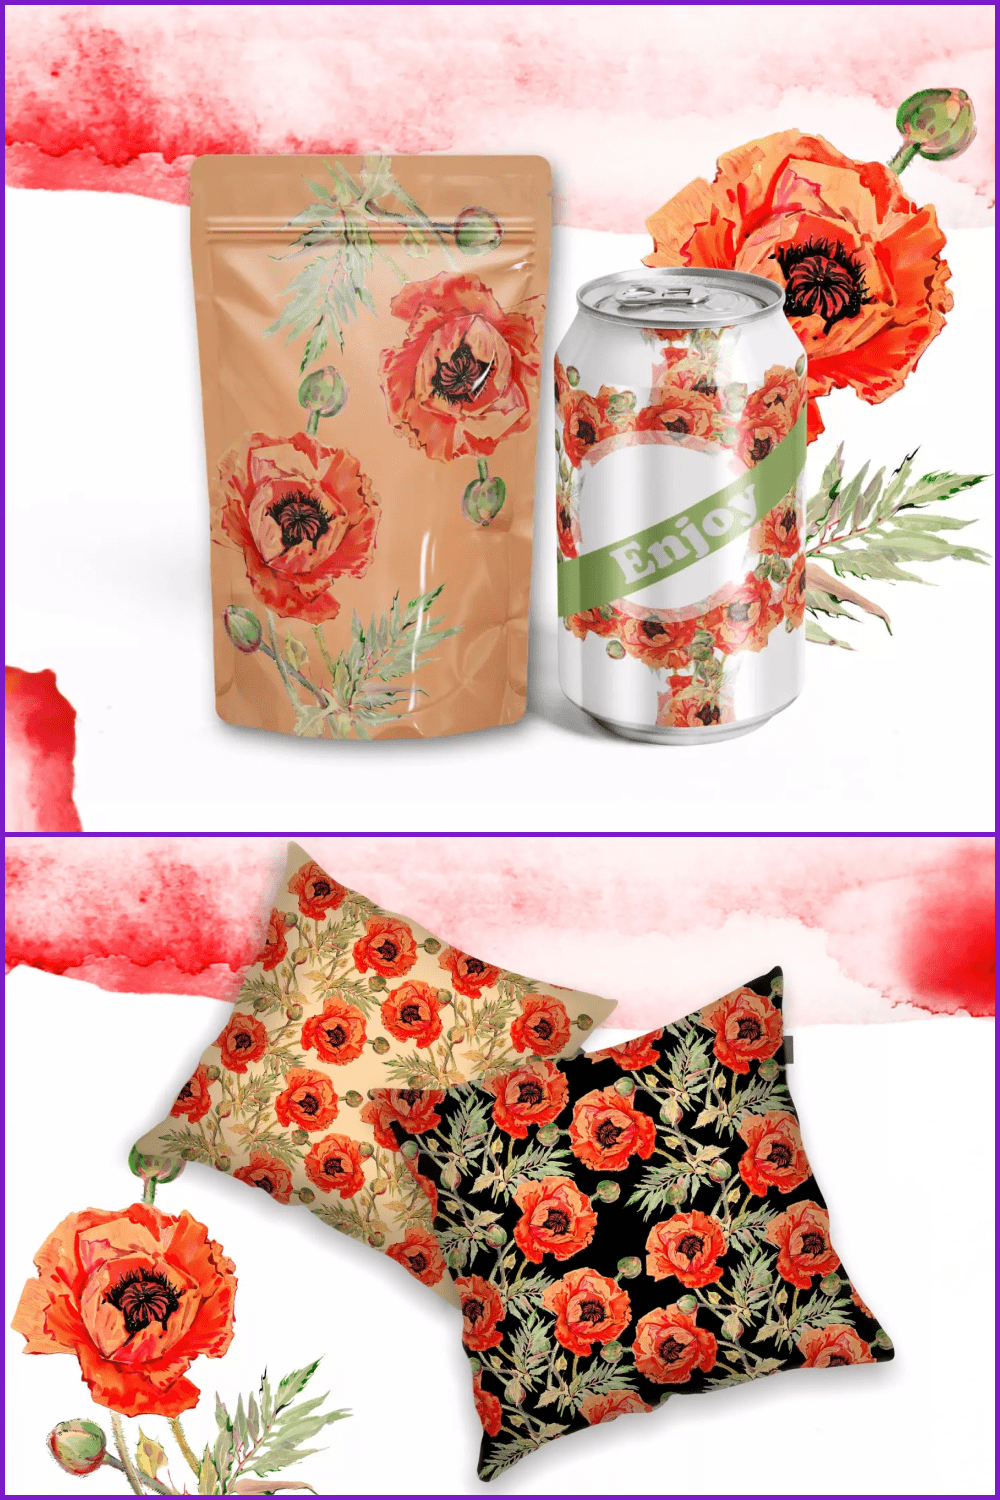 Bright red flowers on the can, package and pillows.